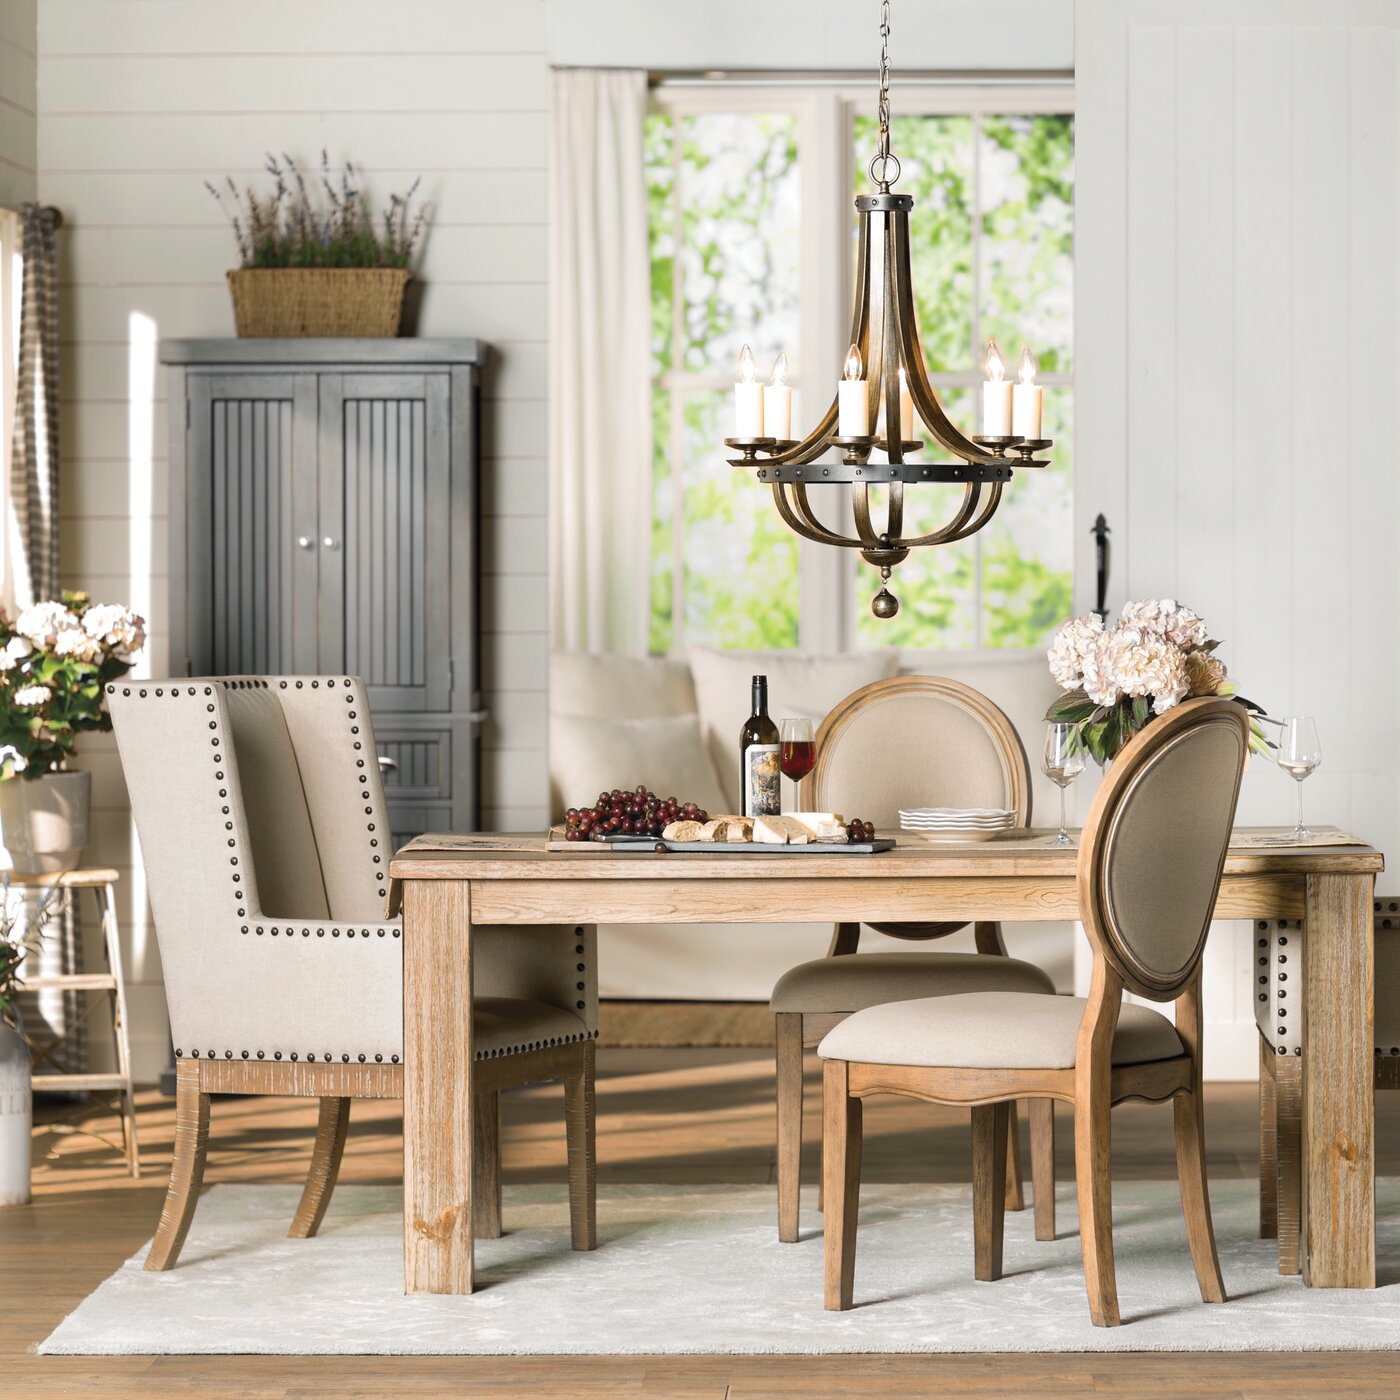 Dining Room Design Tips You Need to Know | Wayfair